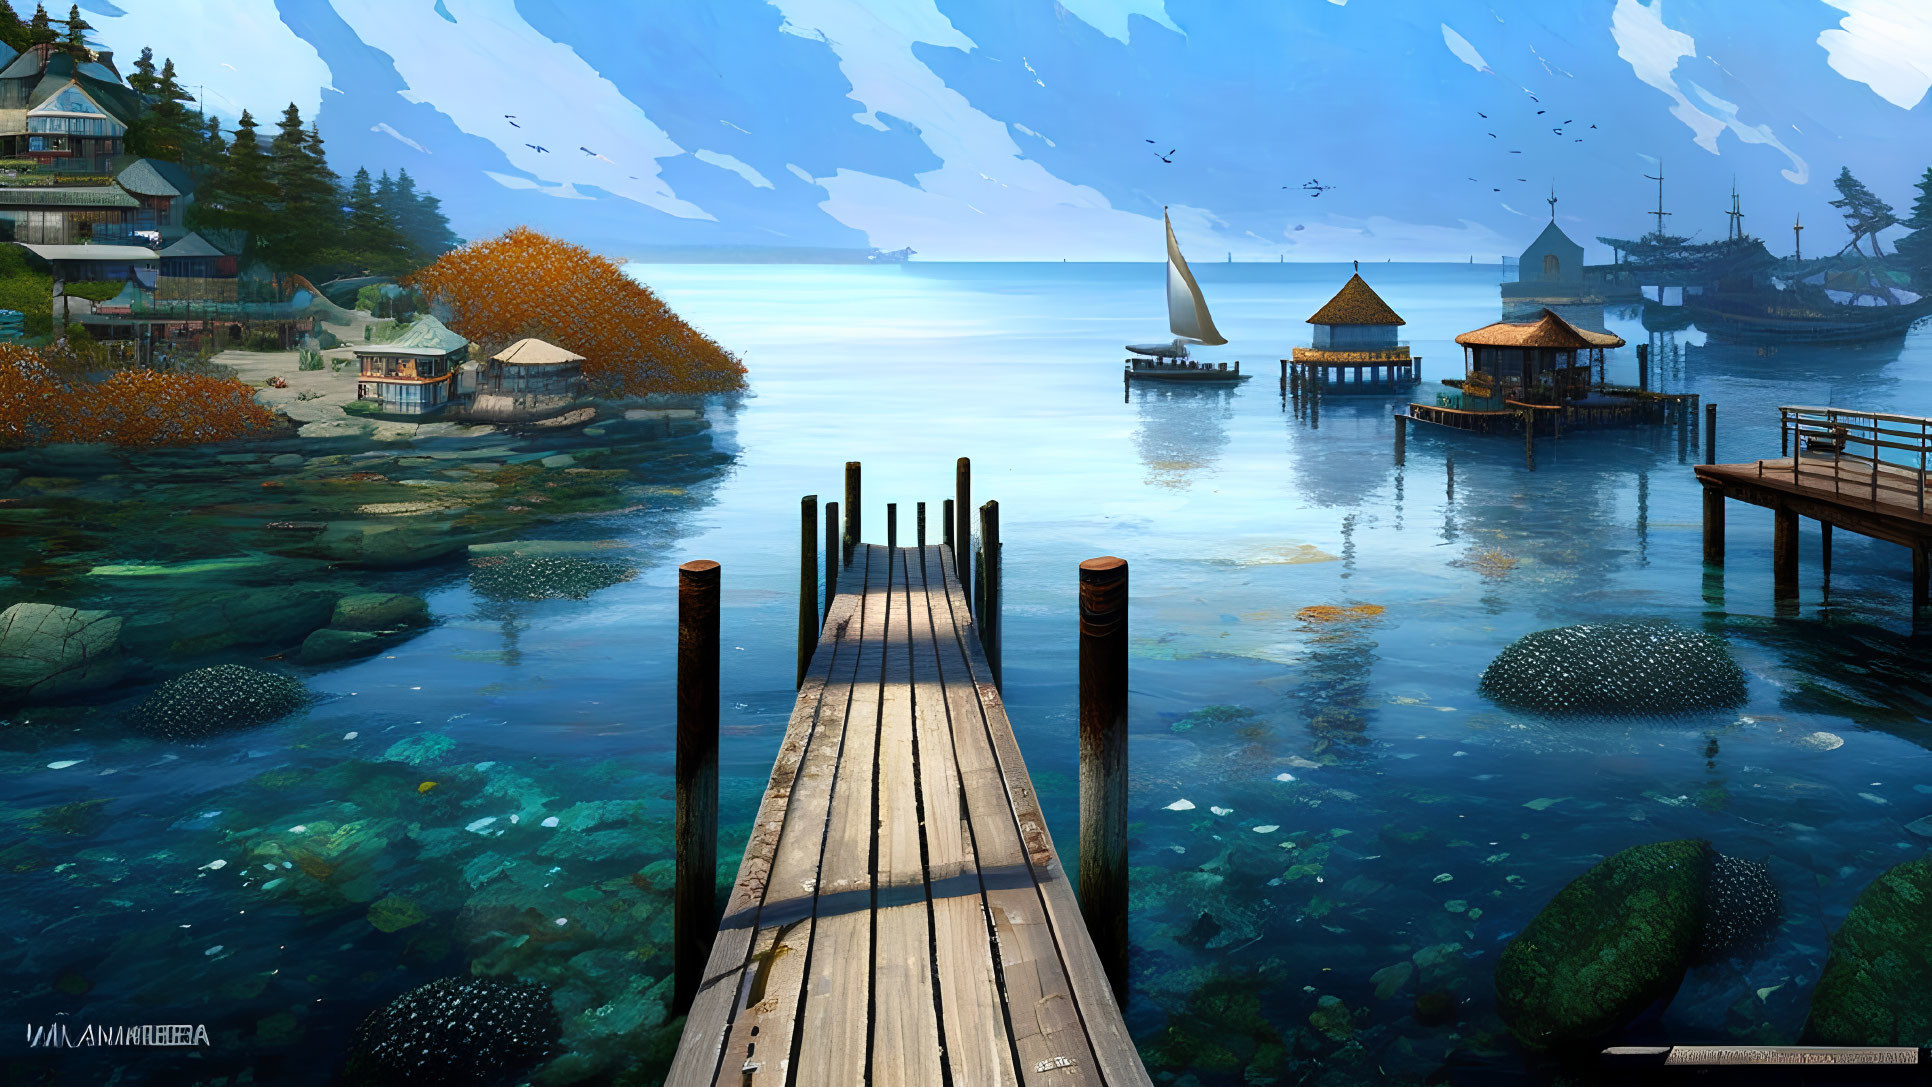 Tranquil lakeside view with wooden dock, houses on stilts, mountains, and sailboat